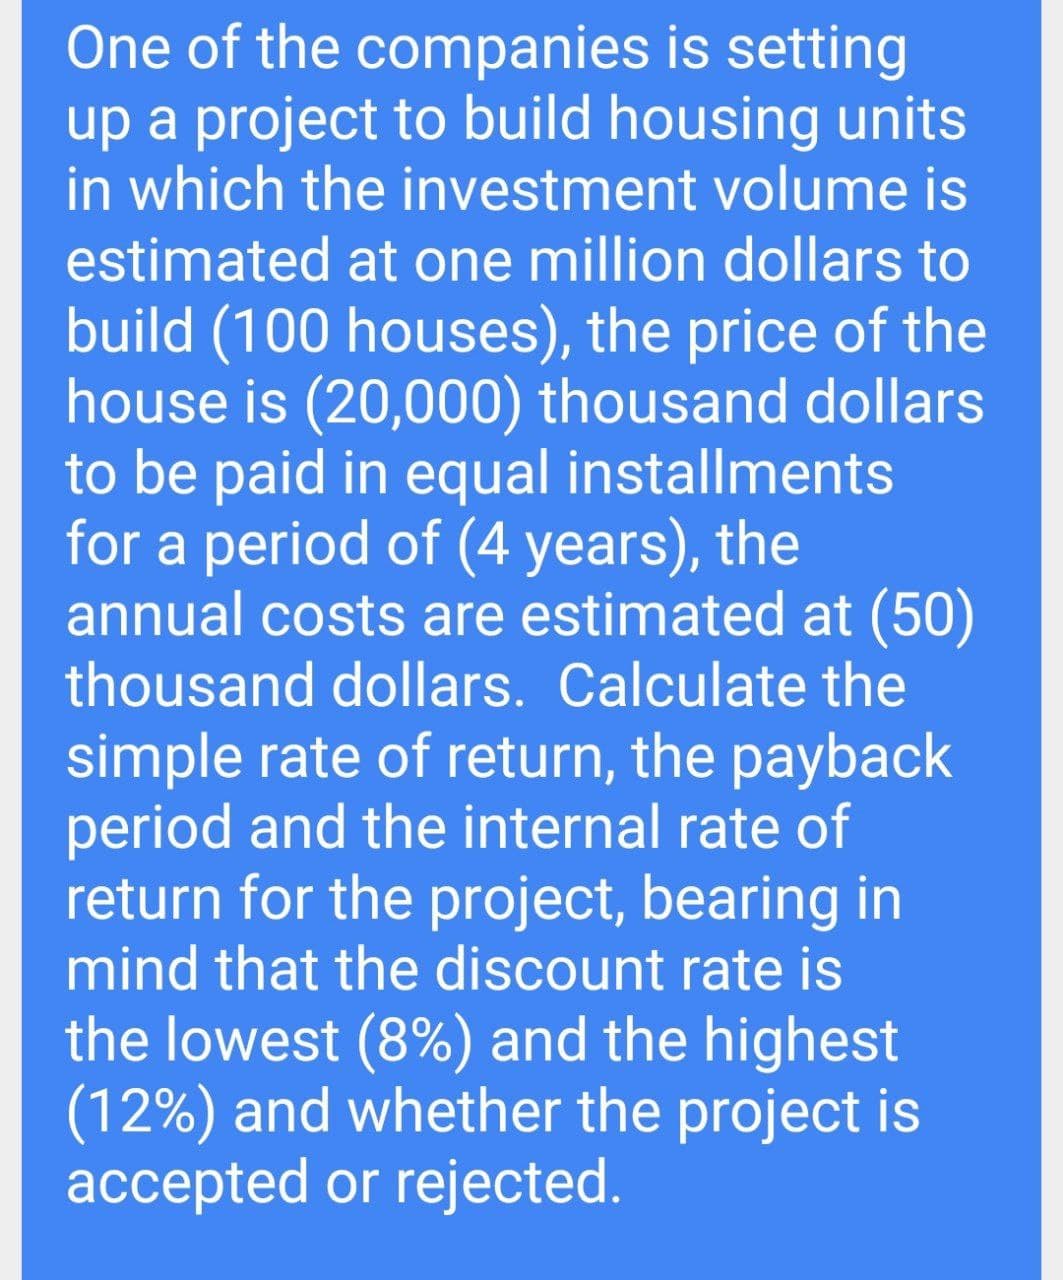 One of the companies is setting
up a project to build housing units
in which the investment volume is
estimated at one million dollars to
build (100 houses), the price of the
house is (20,000) thousand dollars
to be paid in equal installments
for a period of (4 years), the
annual costs are estimated at (50)
thousand dollars. Calculate the
simple rate of return, the payback
period and the internal rate of
return for the project, bearing in
mind that the discount rate is
the lowest (8%) and the highest
(12%) and whether the project is
accepted or rejected.
